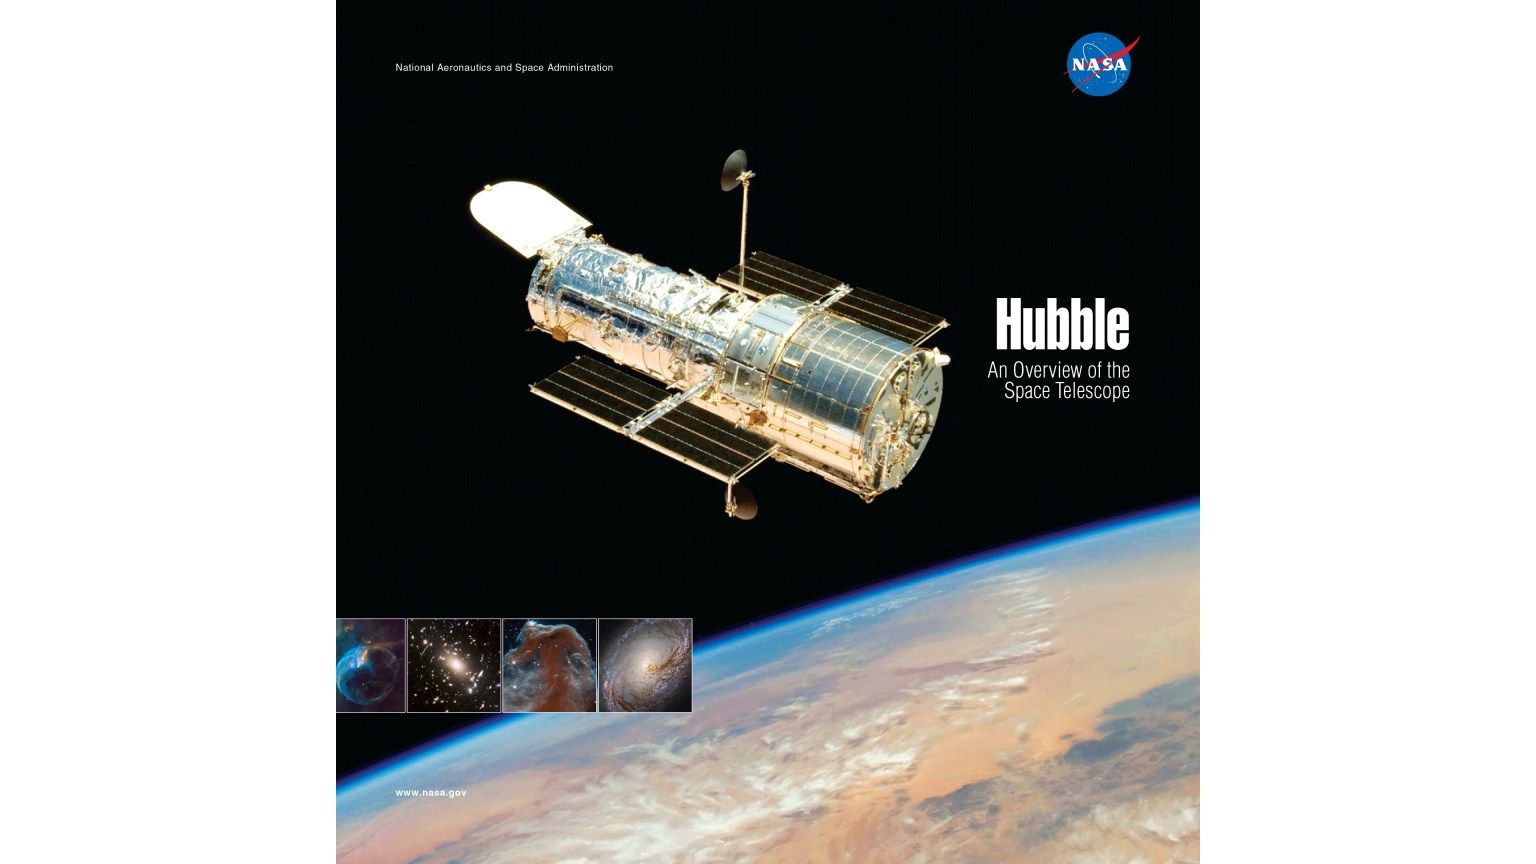 Hubble overview book cover